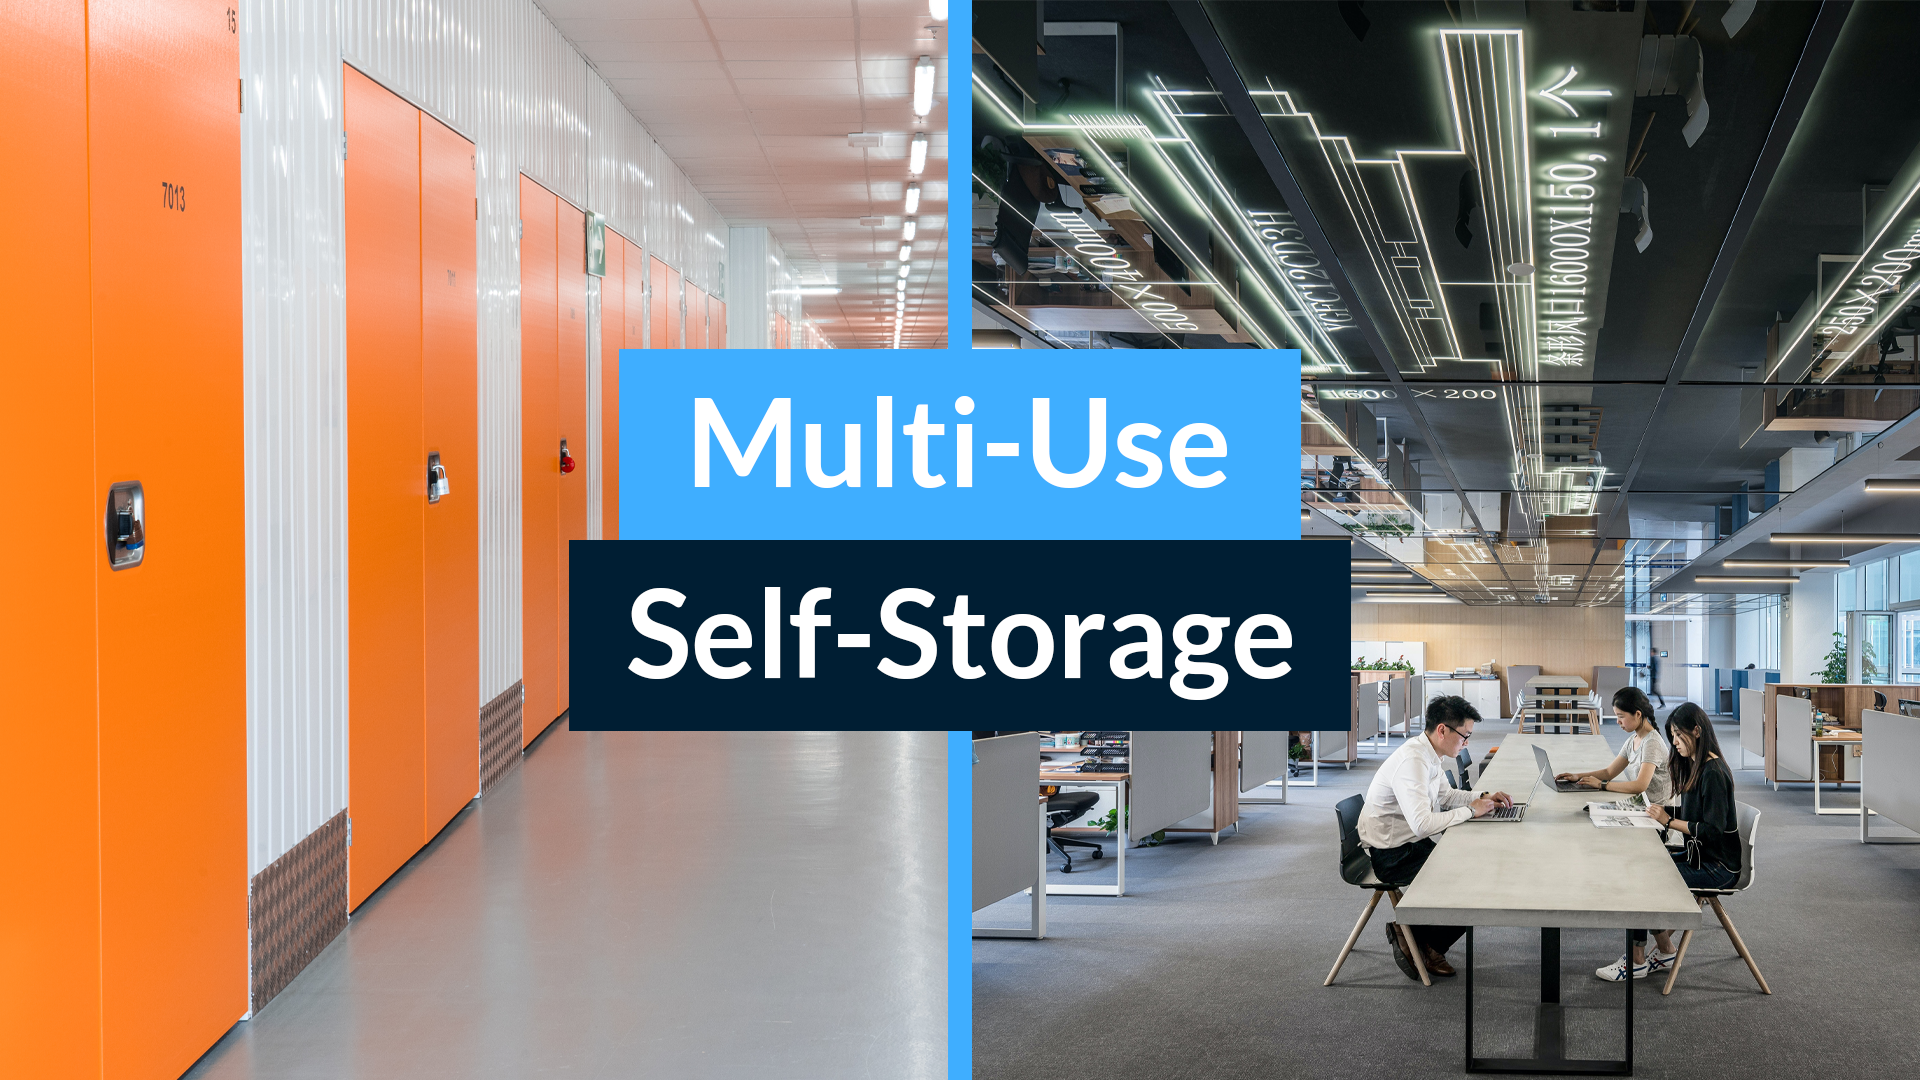 Will Mixed-Use Development in the Self-Storage Industry Be Its Golden Hoard?